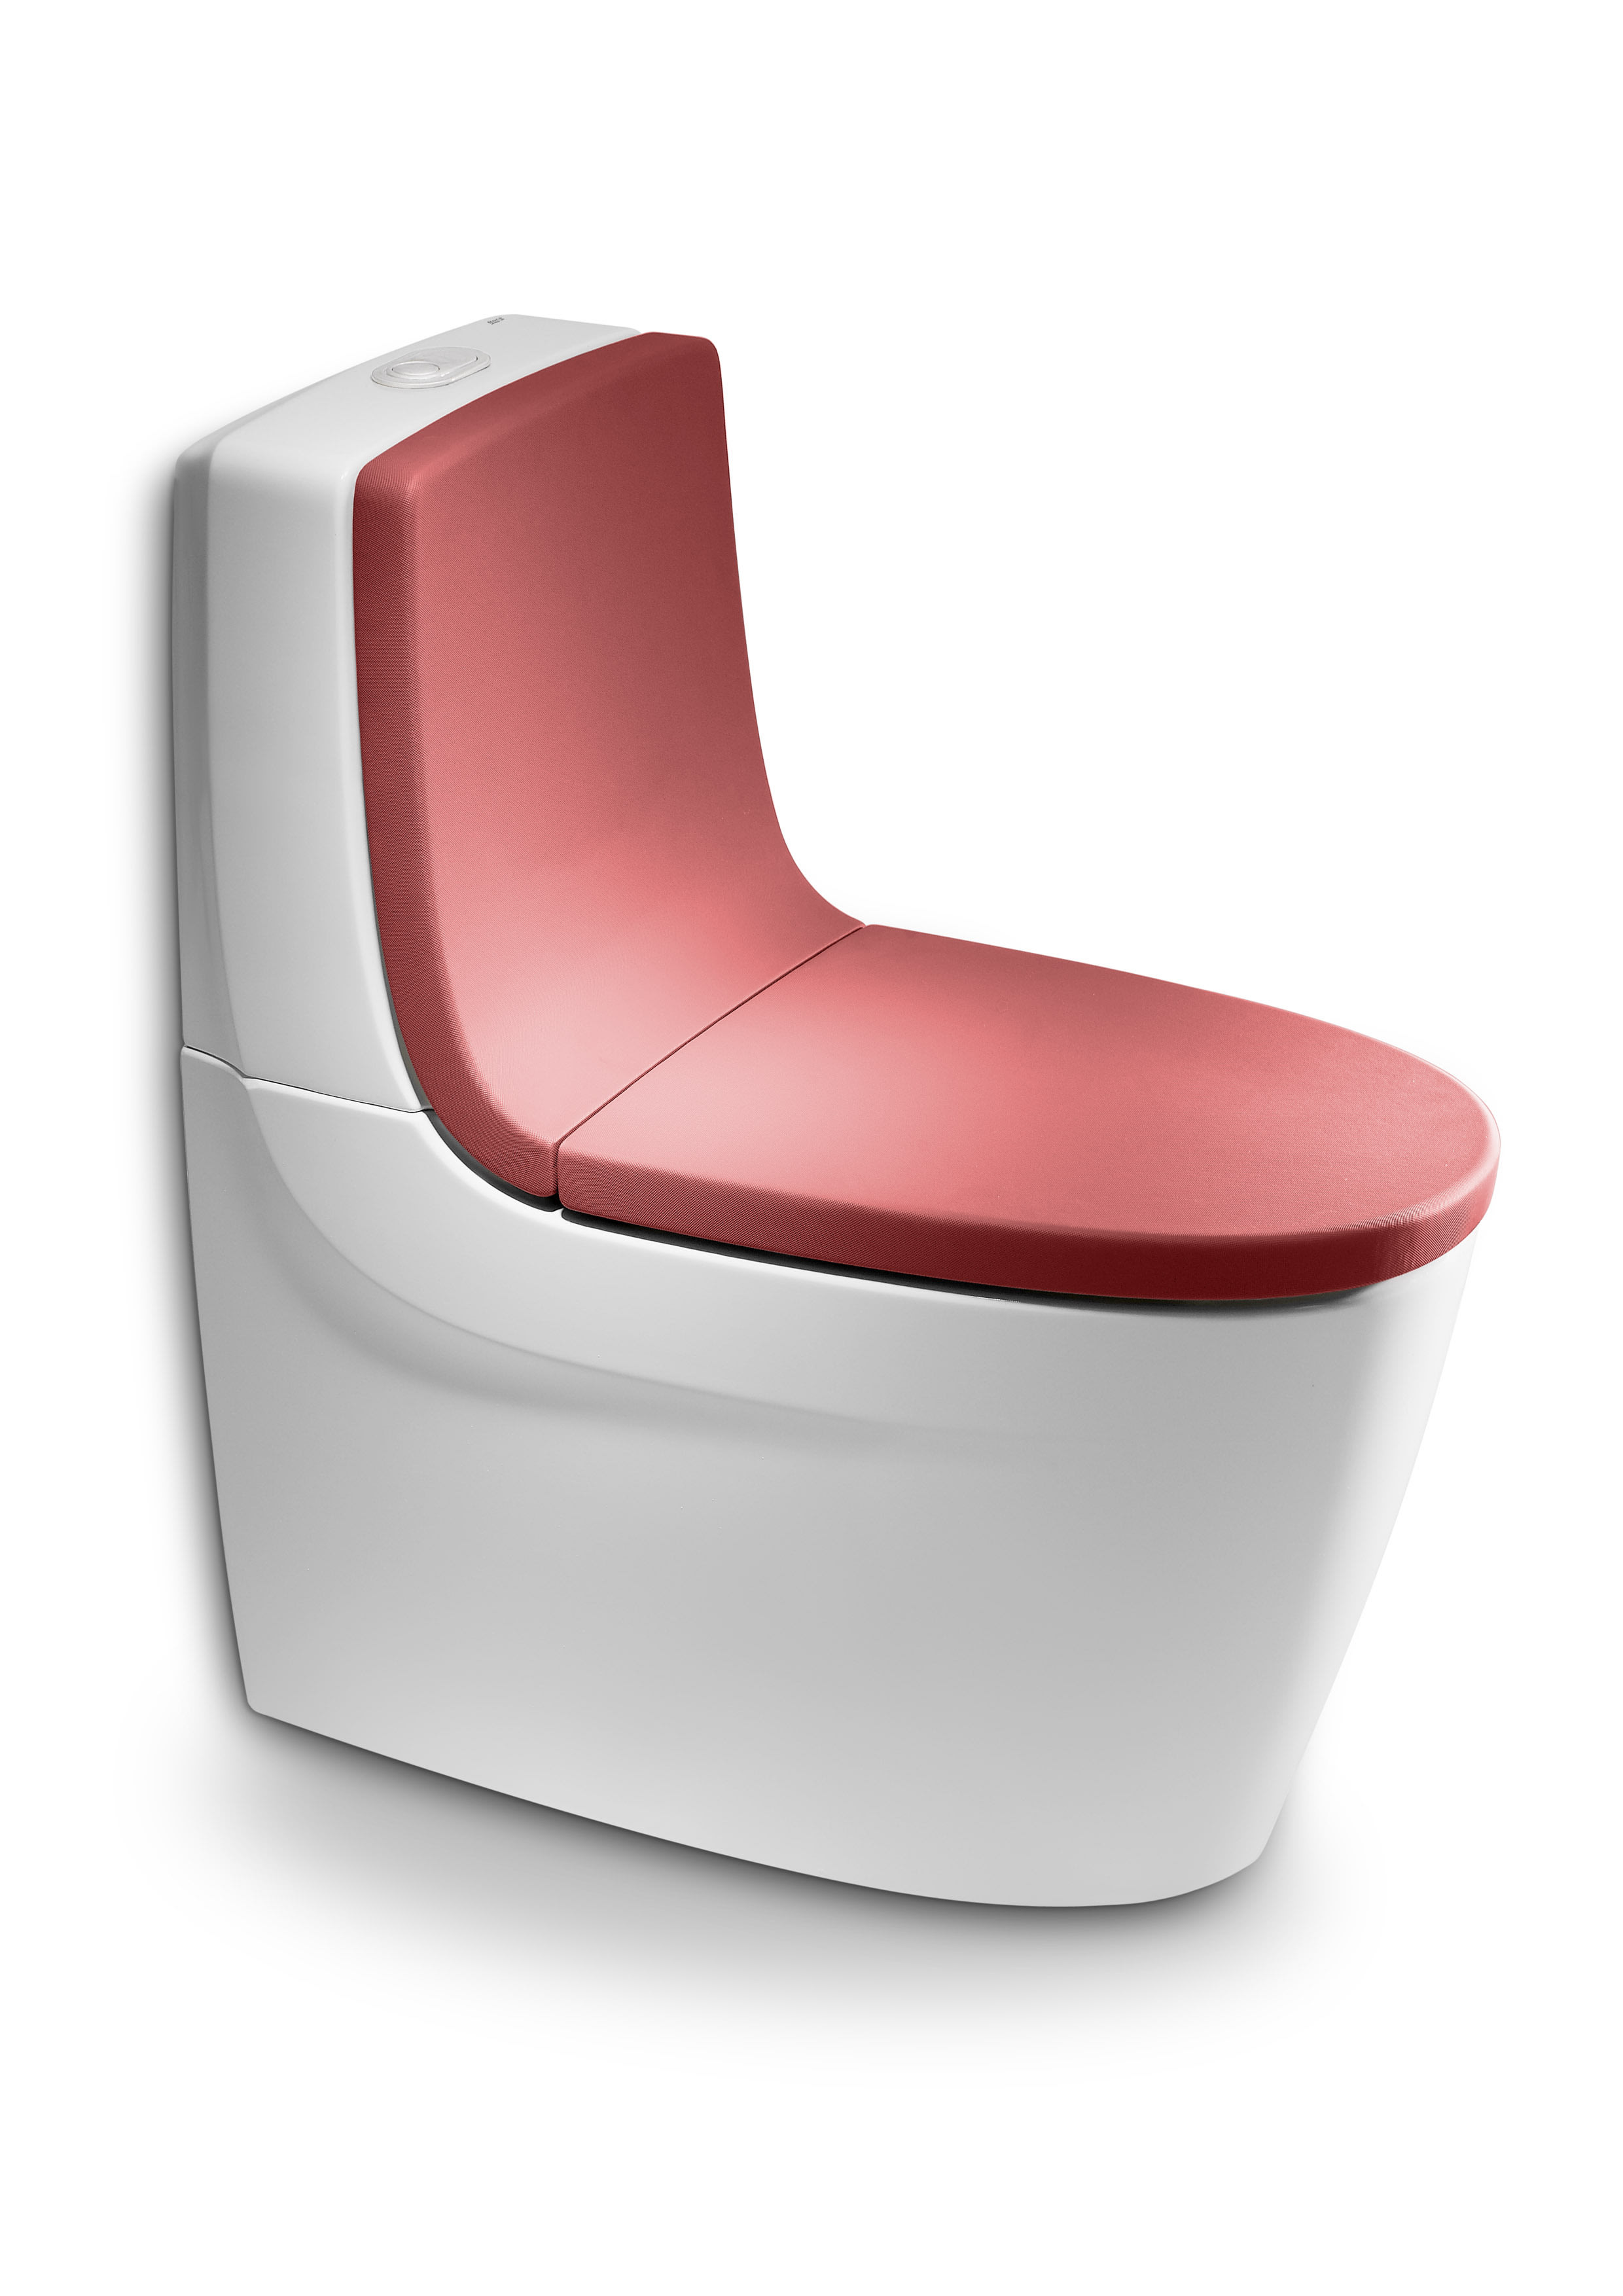 Toilet seats and covers Passion Red Khroma A80165AF3T Roca